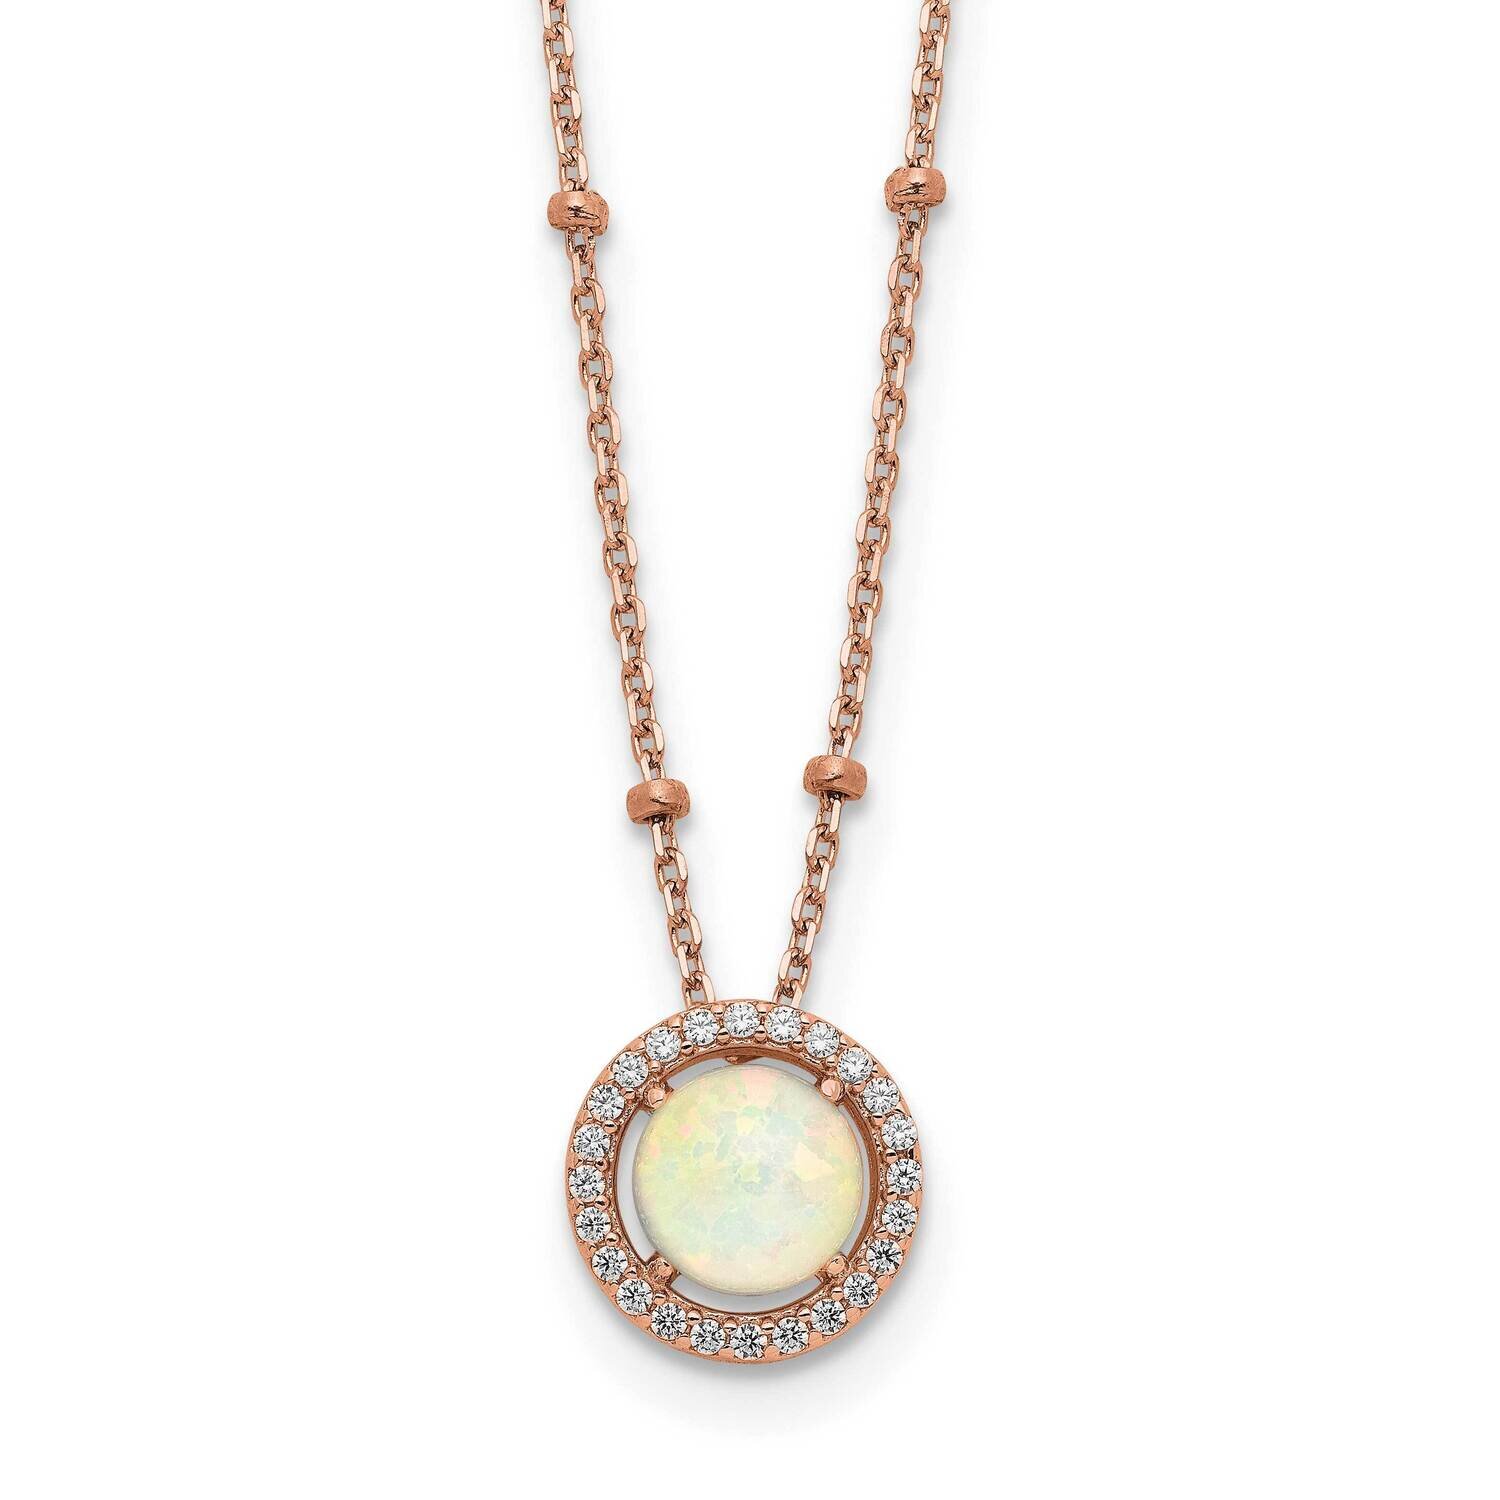 White Created Opal CZ Diamond with 2 In Extender Necklace 16 Inch Sterling Silver Rose-Tone QG6187-16